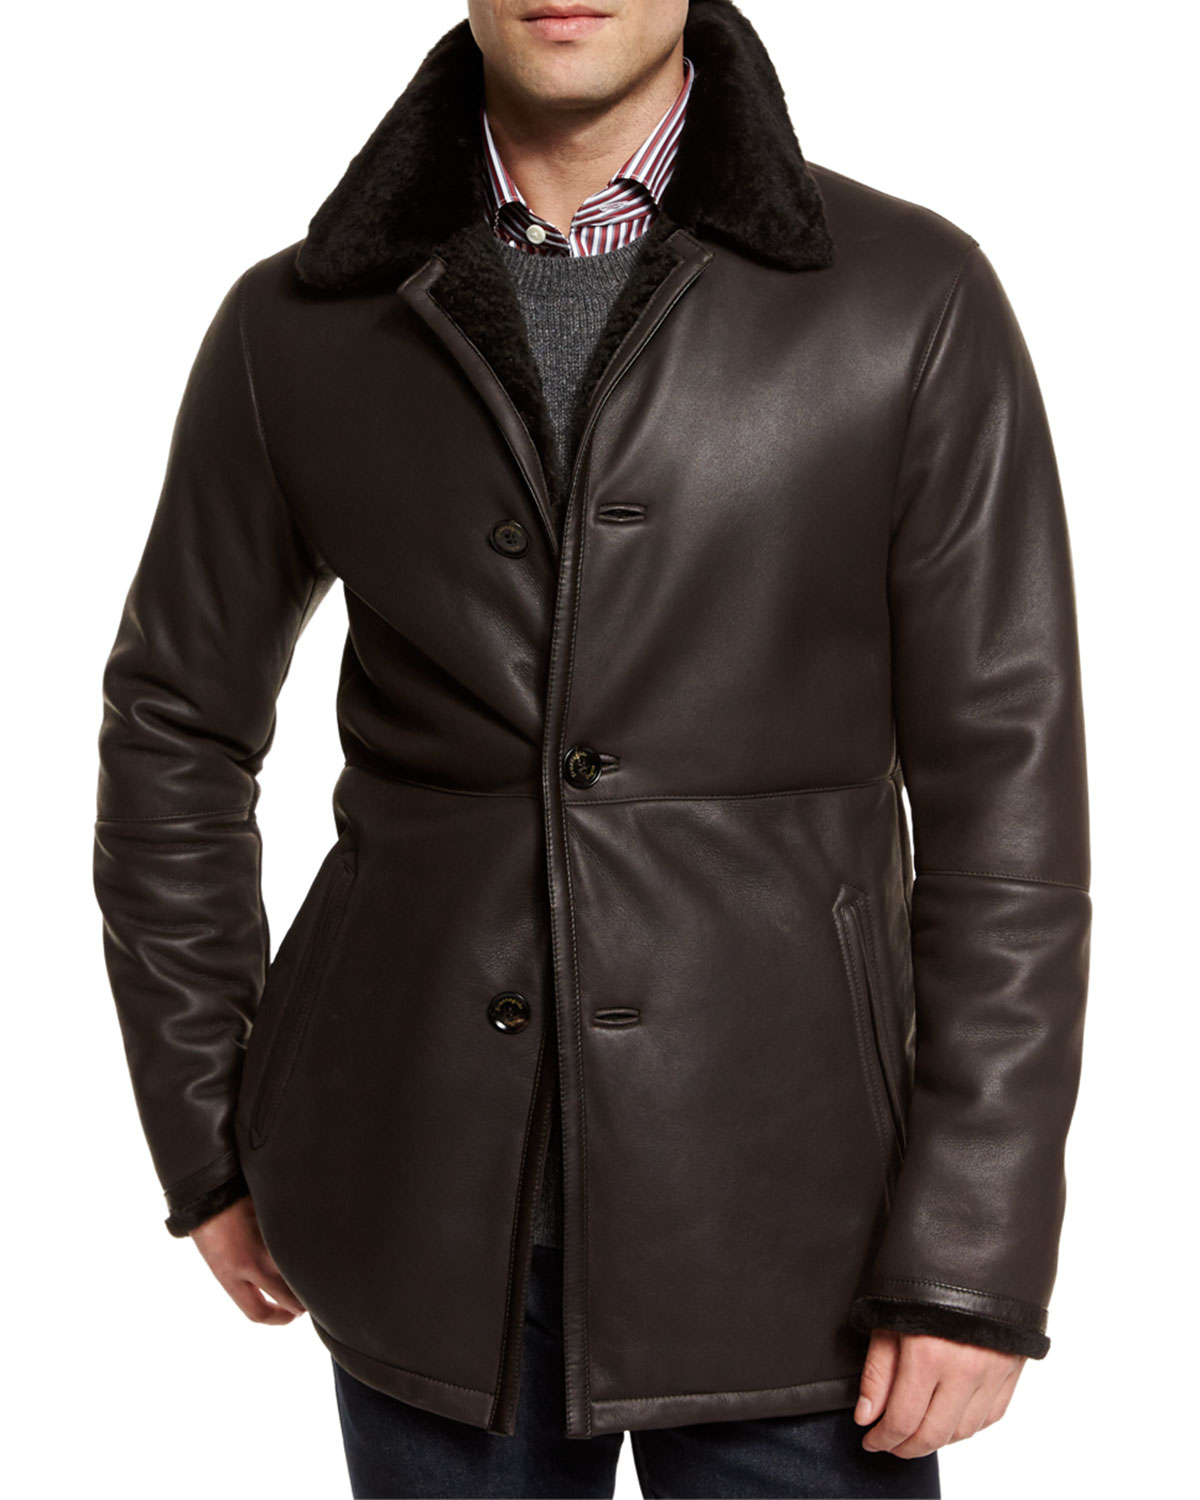 Ermenegildo zegna Leather Jacket With Shearling Fur-lined Collar in ...